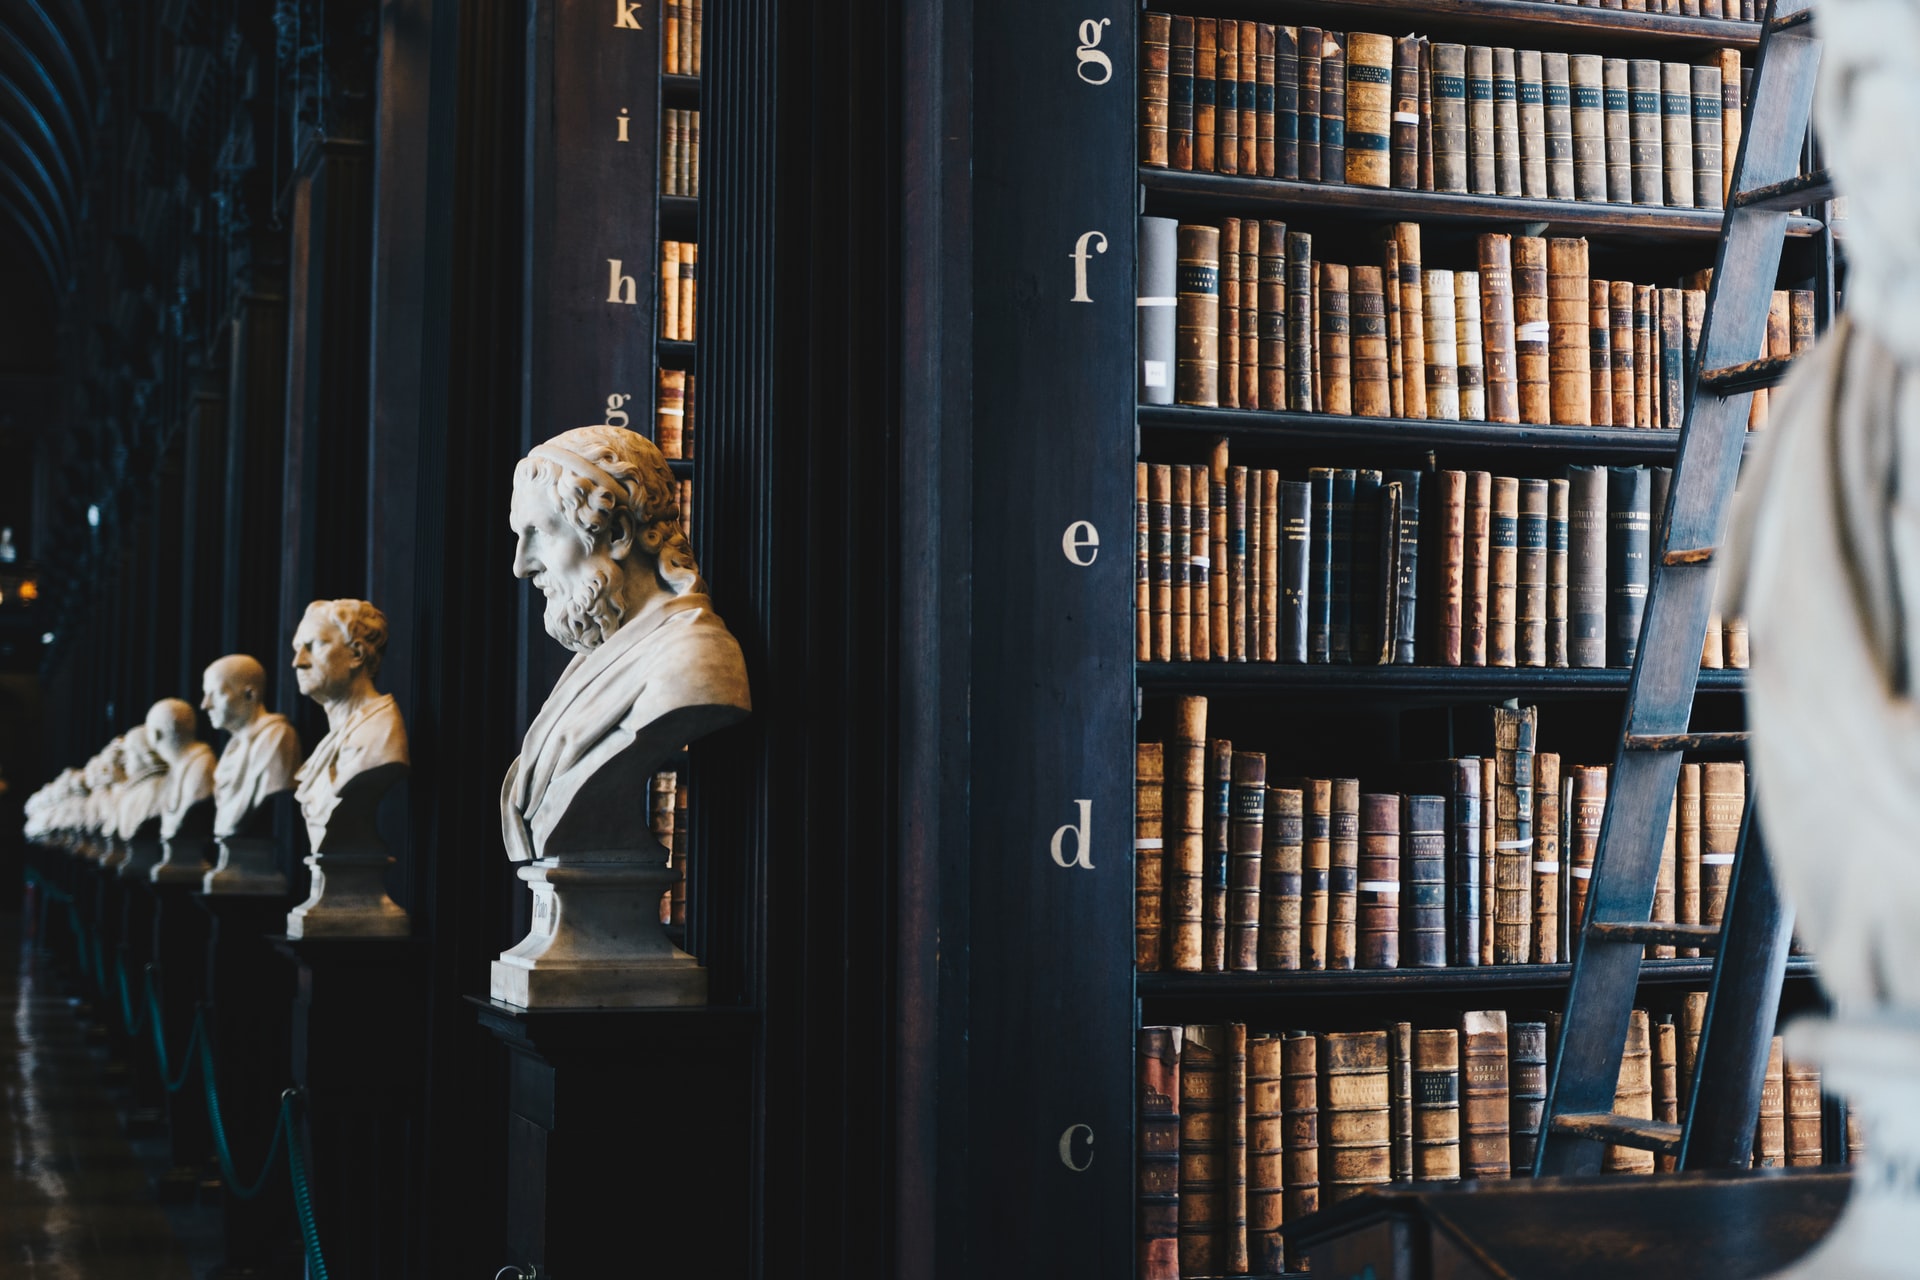 A large library featuring shelves of well-worn books and busts of historical figures